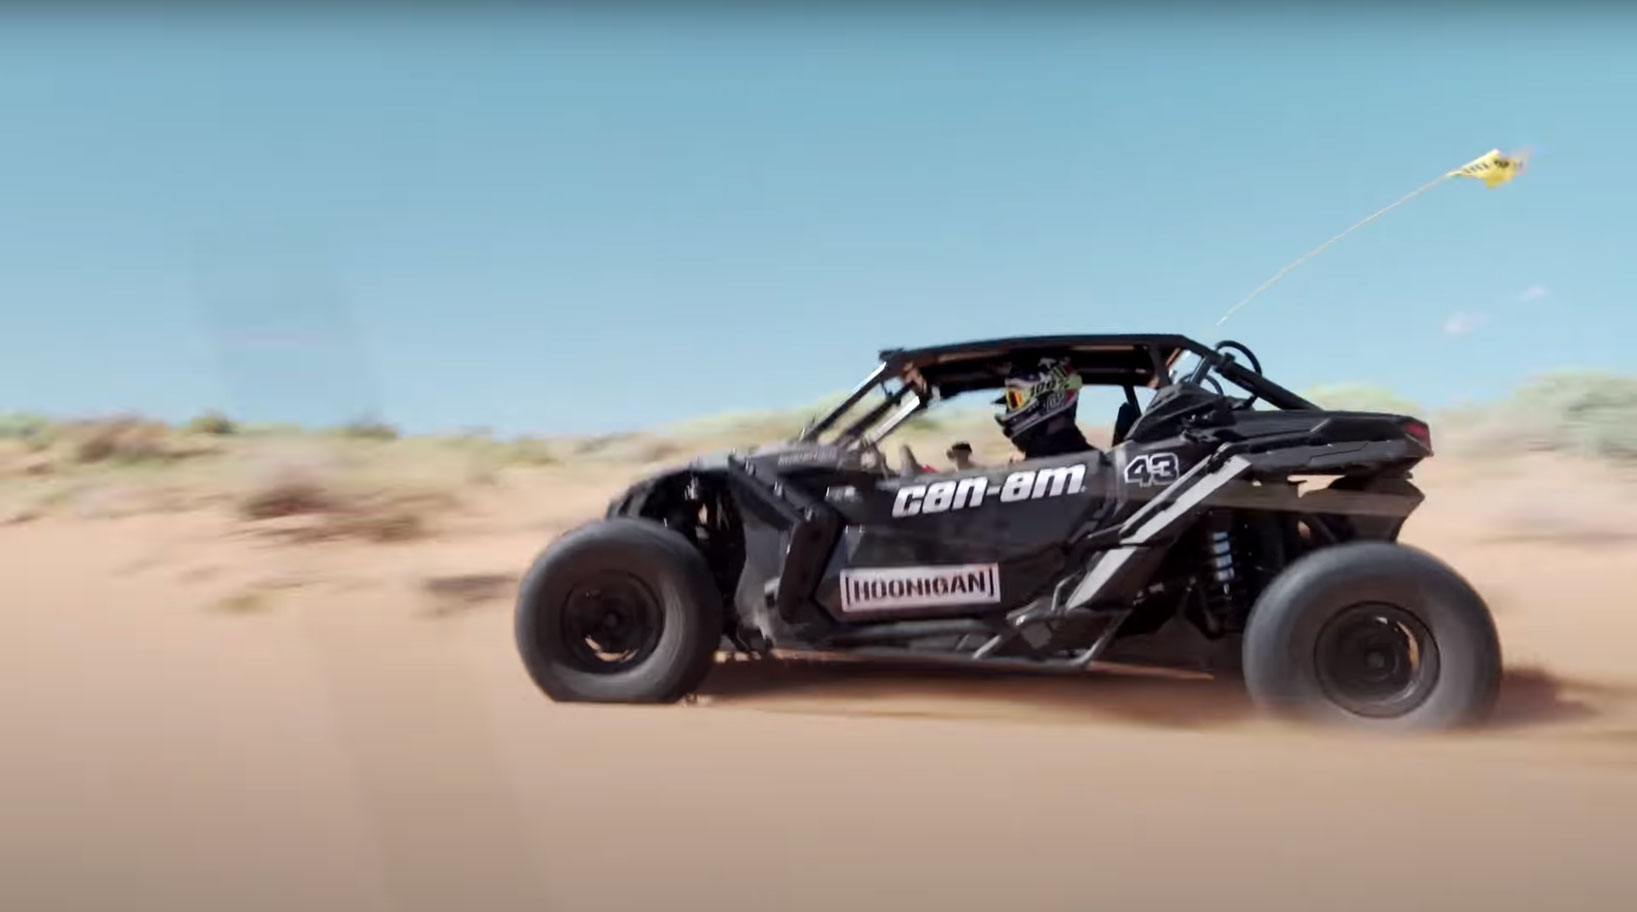 Ken Block's Guide to Awesome Can-Am Riding Spots: Sand Hollow, Utah!